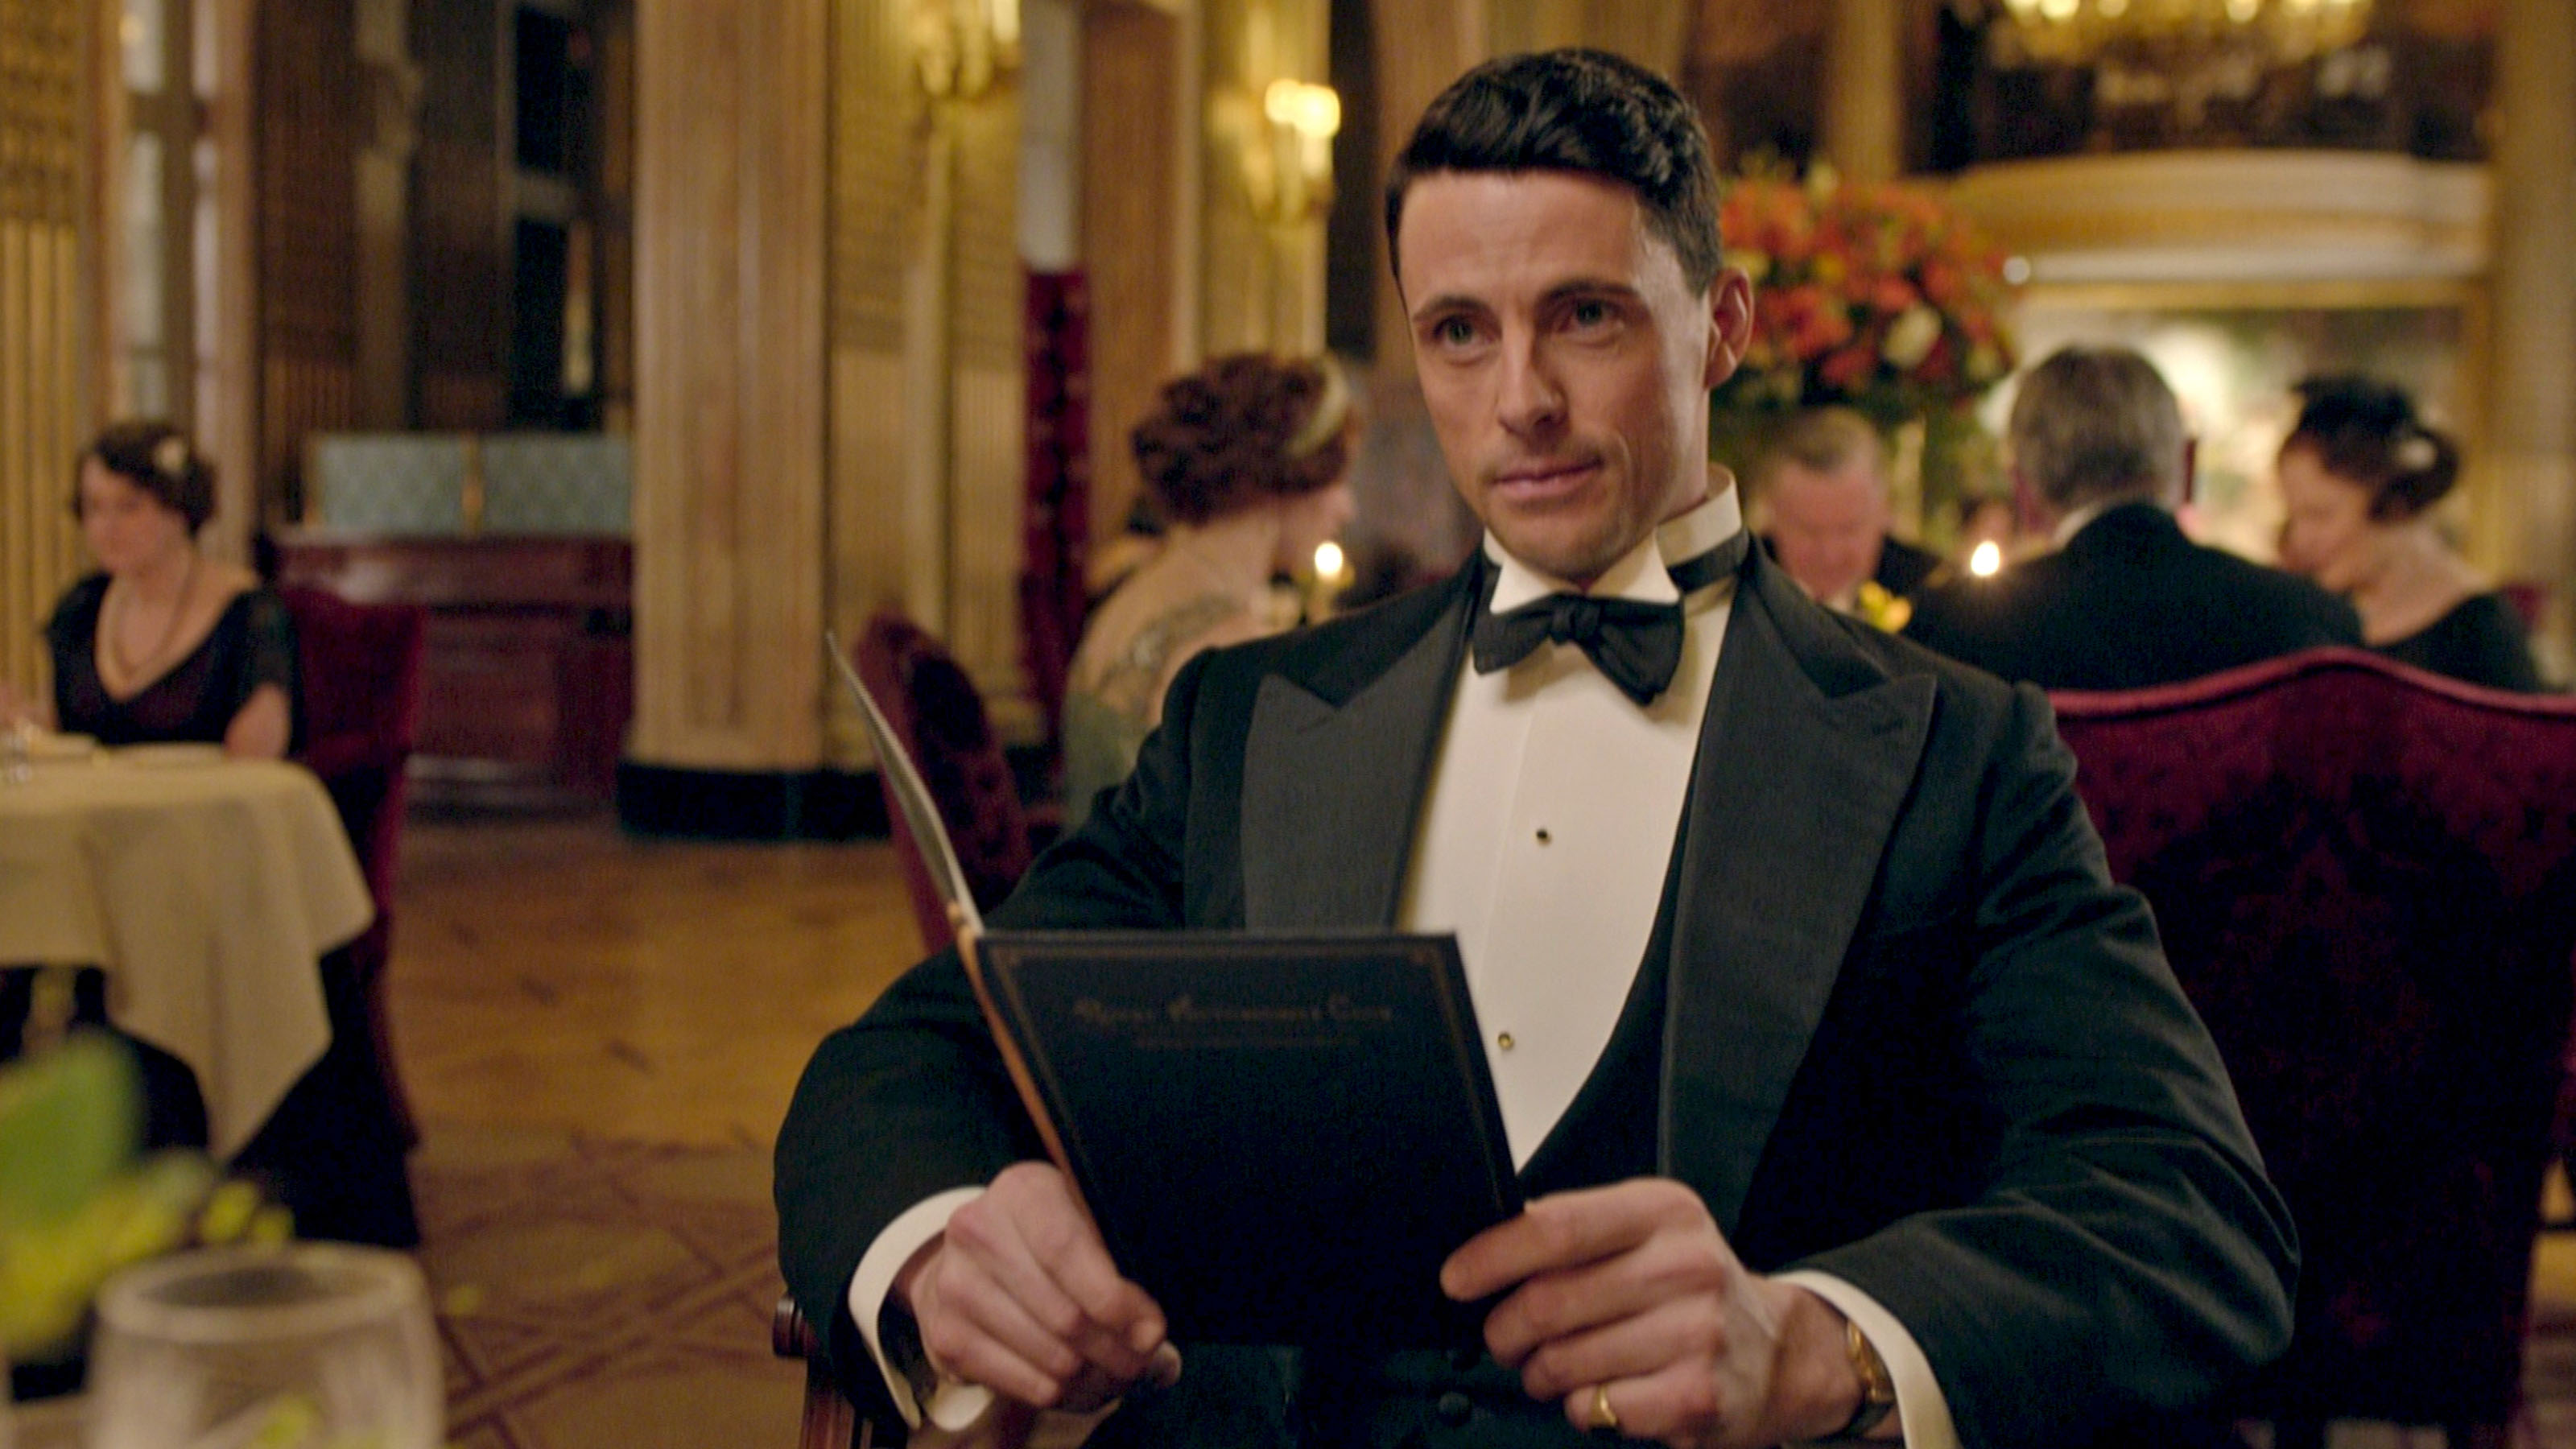 Dapper Lad Matthew Goode Is Set To Appear In The ‘Downton Abbey’ Flick